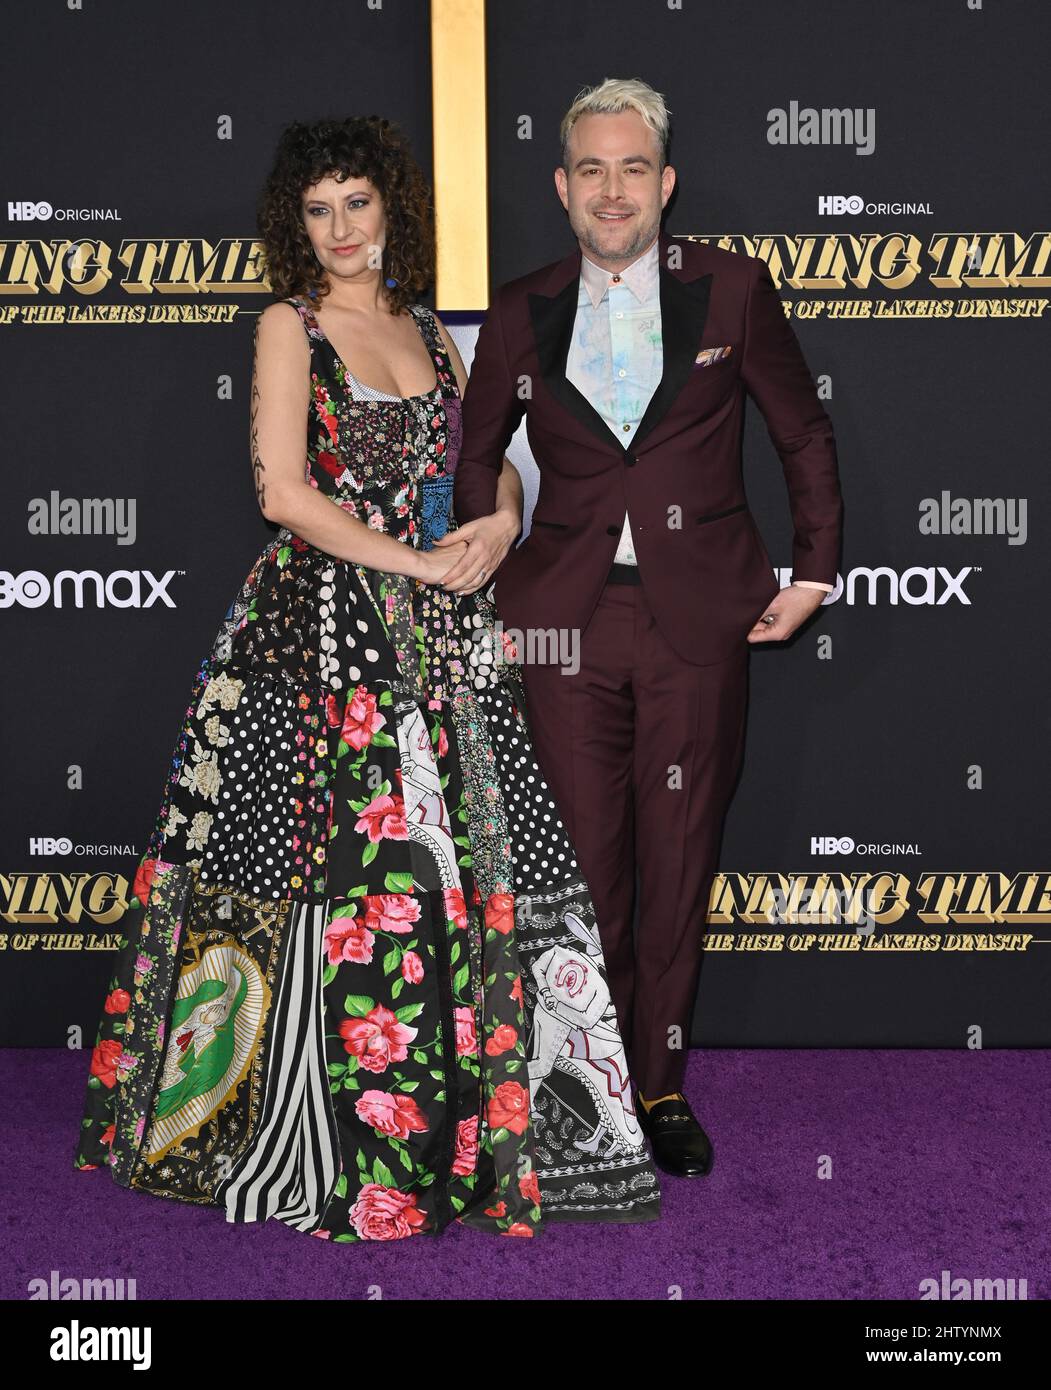 Los Angeles, USA. 02nd Mar, 2022. LOS ANGELES, USA. March 02, 2022: Sofiya Goldshteyn & Max Borenstein at the premiere for HBO's 'Winning Time: The Rise of the Lakers Dynasty' at the Ace Theatre. Picture Credit: Paul Smith/Alamy Live News Stock Photo